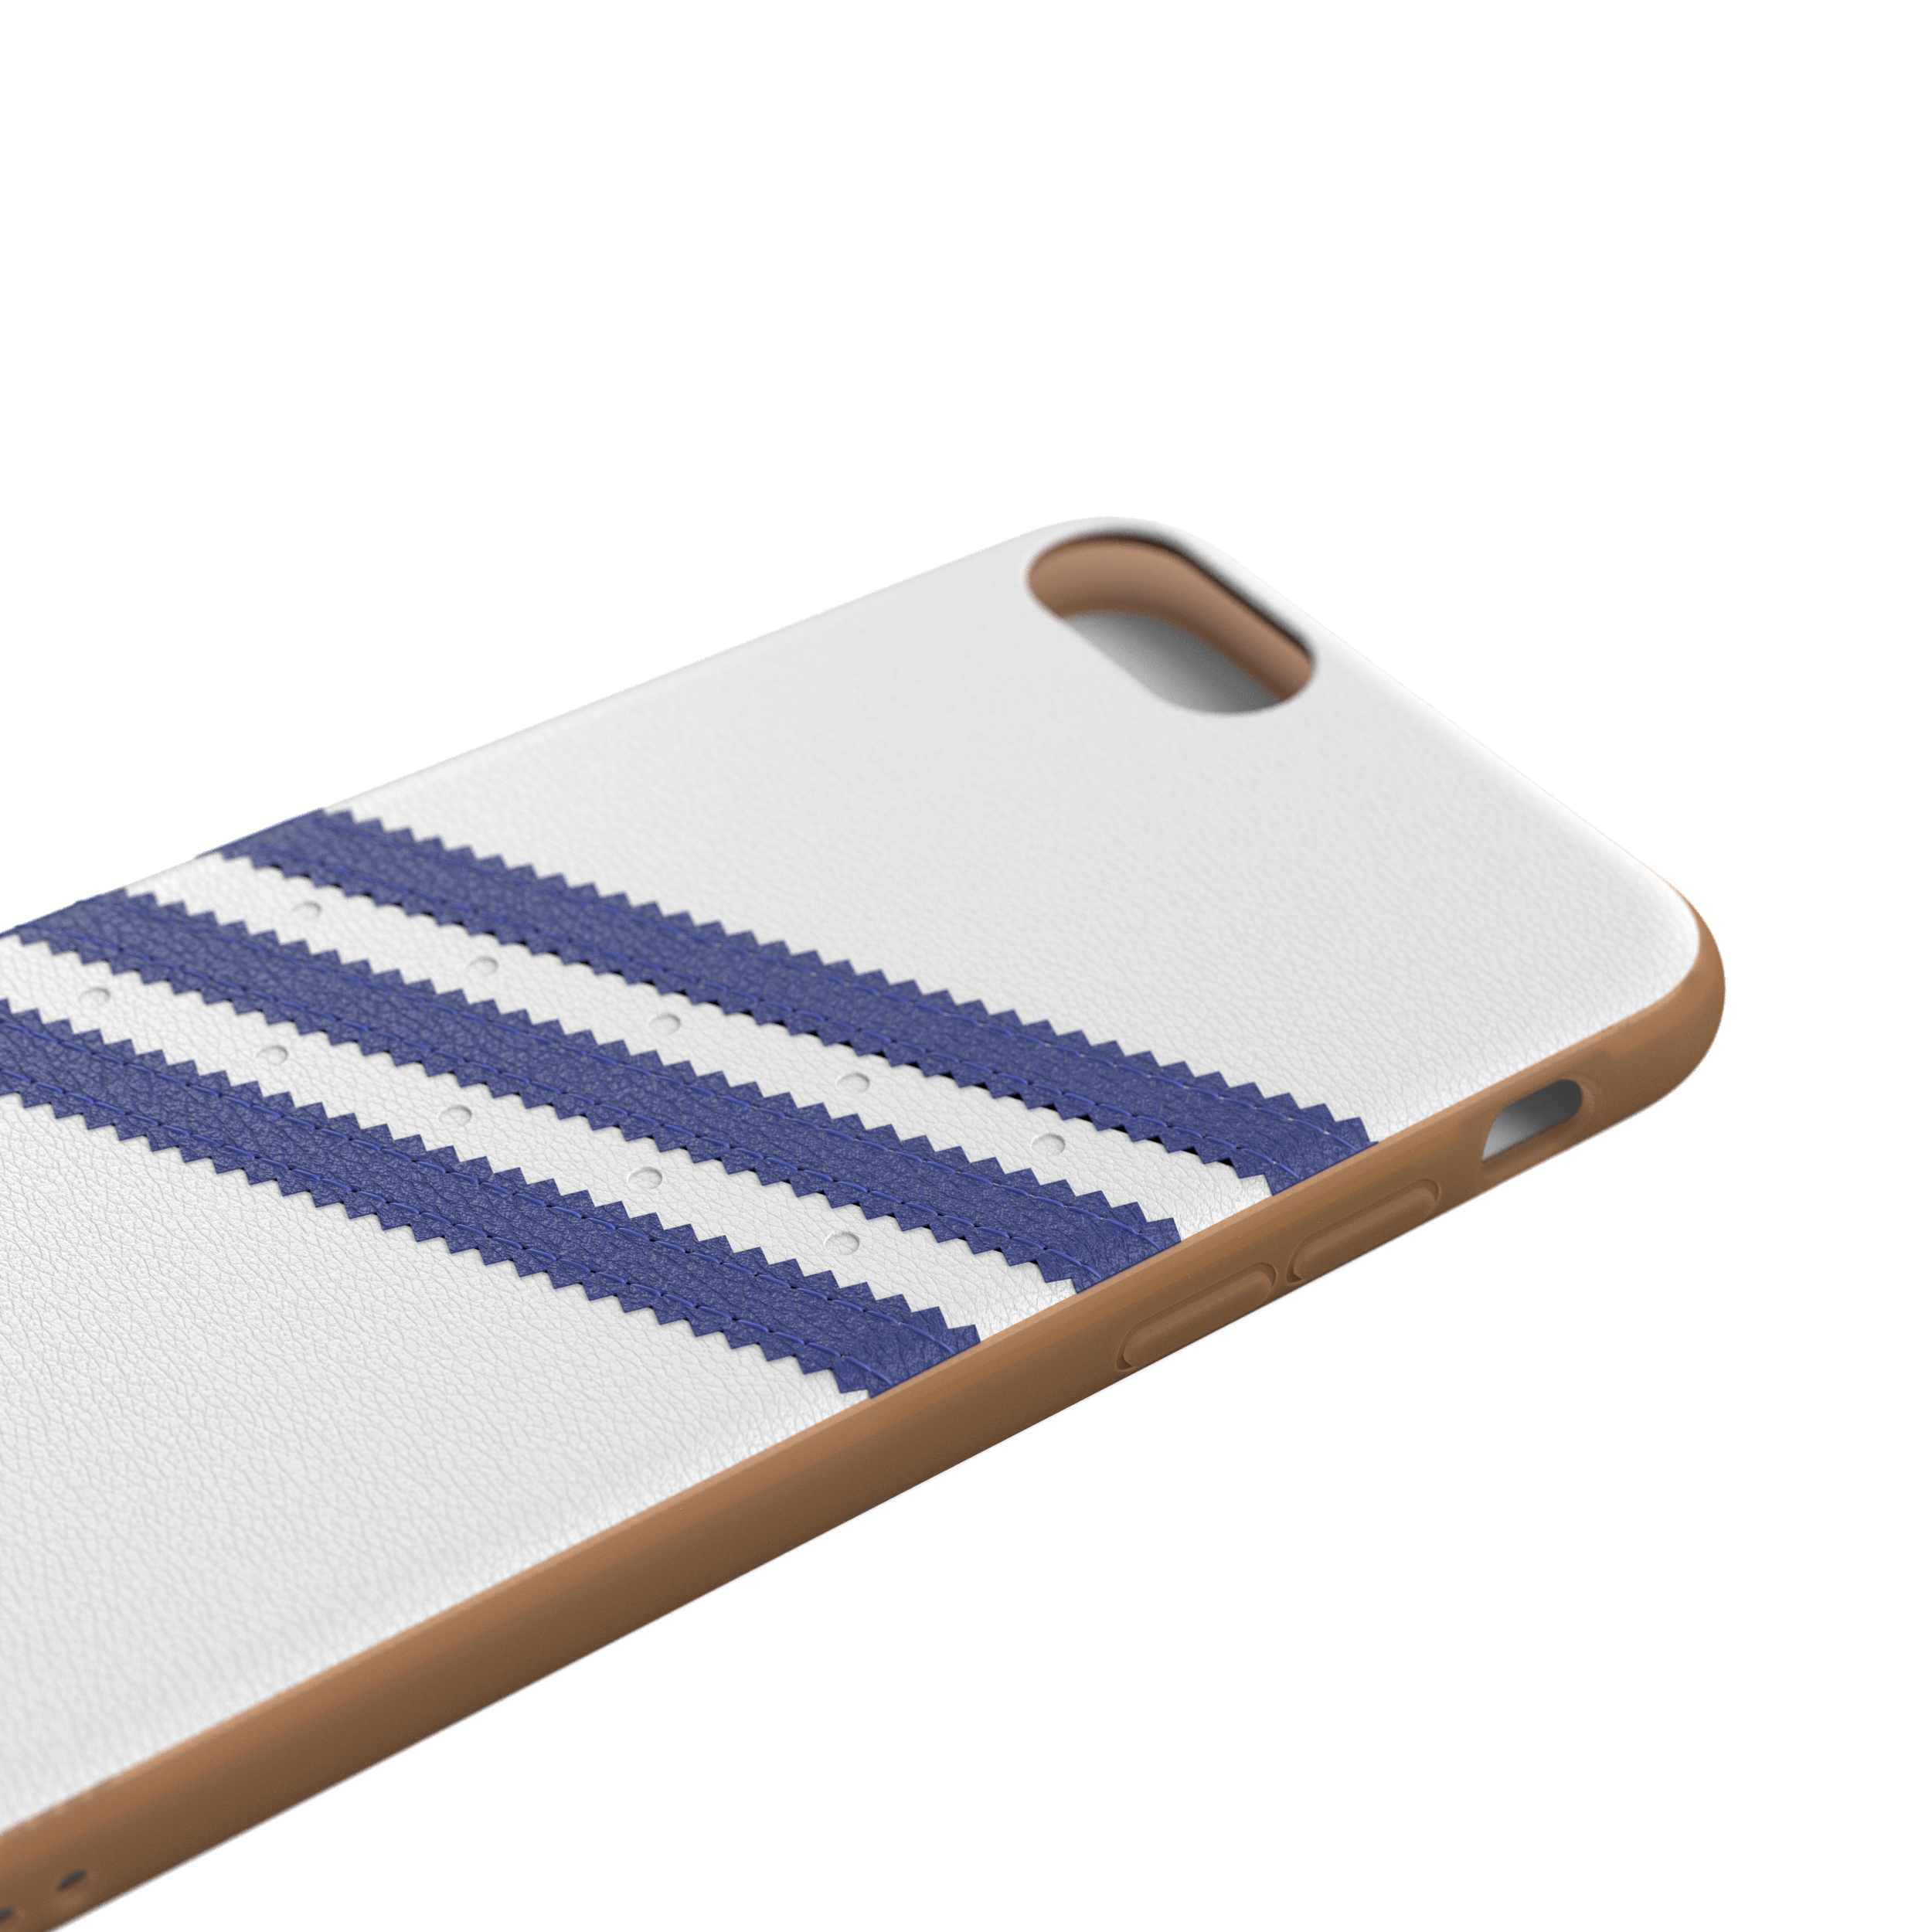 Backcover, 8, 6, ADIDAS Weiß/Blau 7, OR Moulded ORIGINALS iPhone Case, iPhone iPhone iPhone (2020), Apple, SE